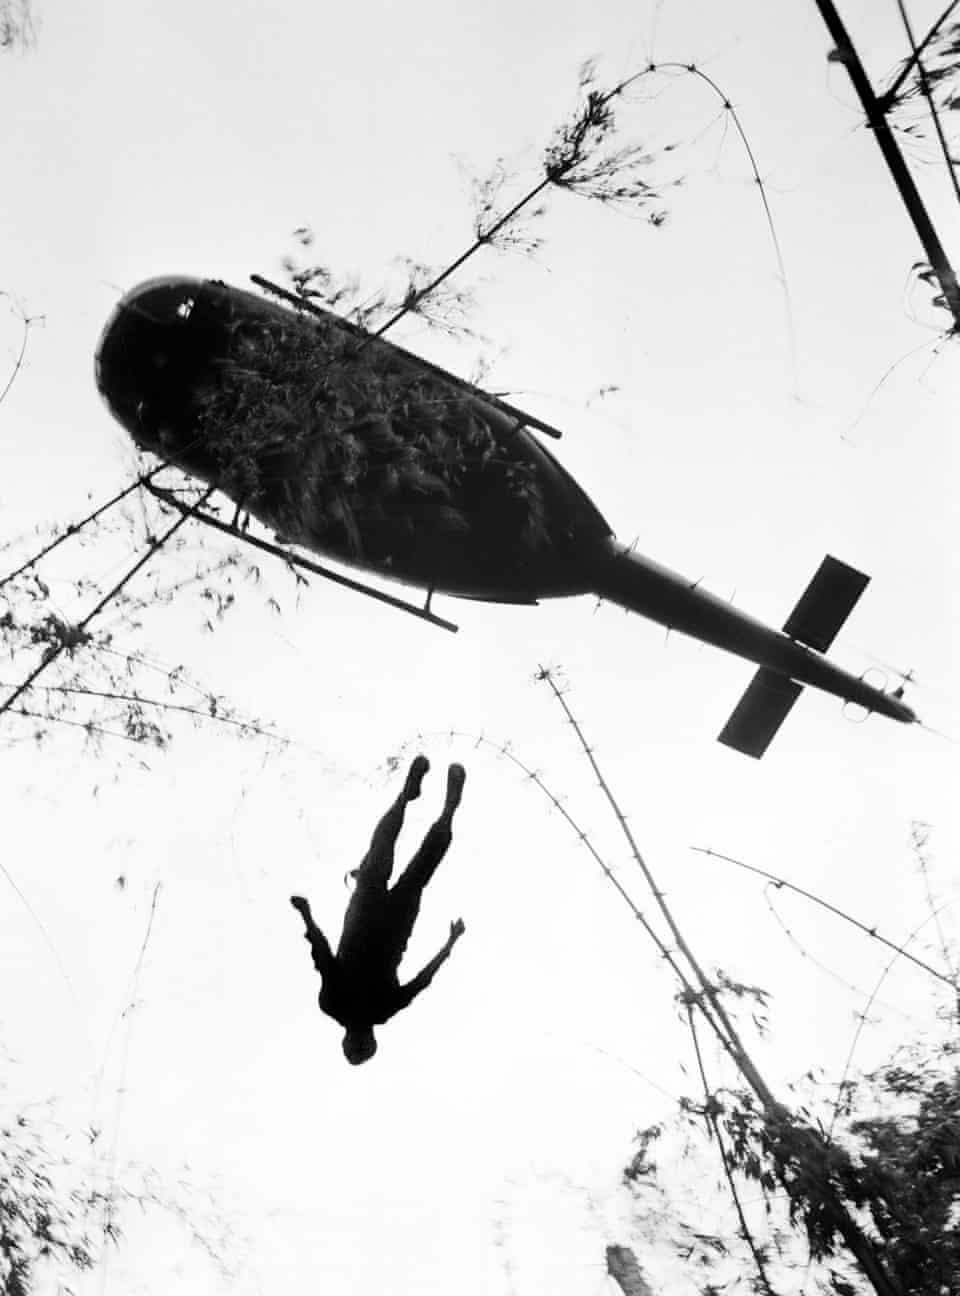 The body of a US paratrooper killed in action in the jungle near the Cambodian border is lifted up to an evacuation helicopter in war zone C, 14 May 1966, during the Vietnam War